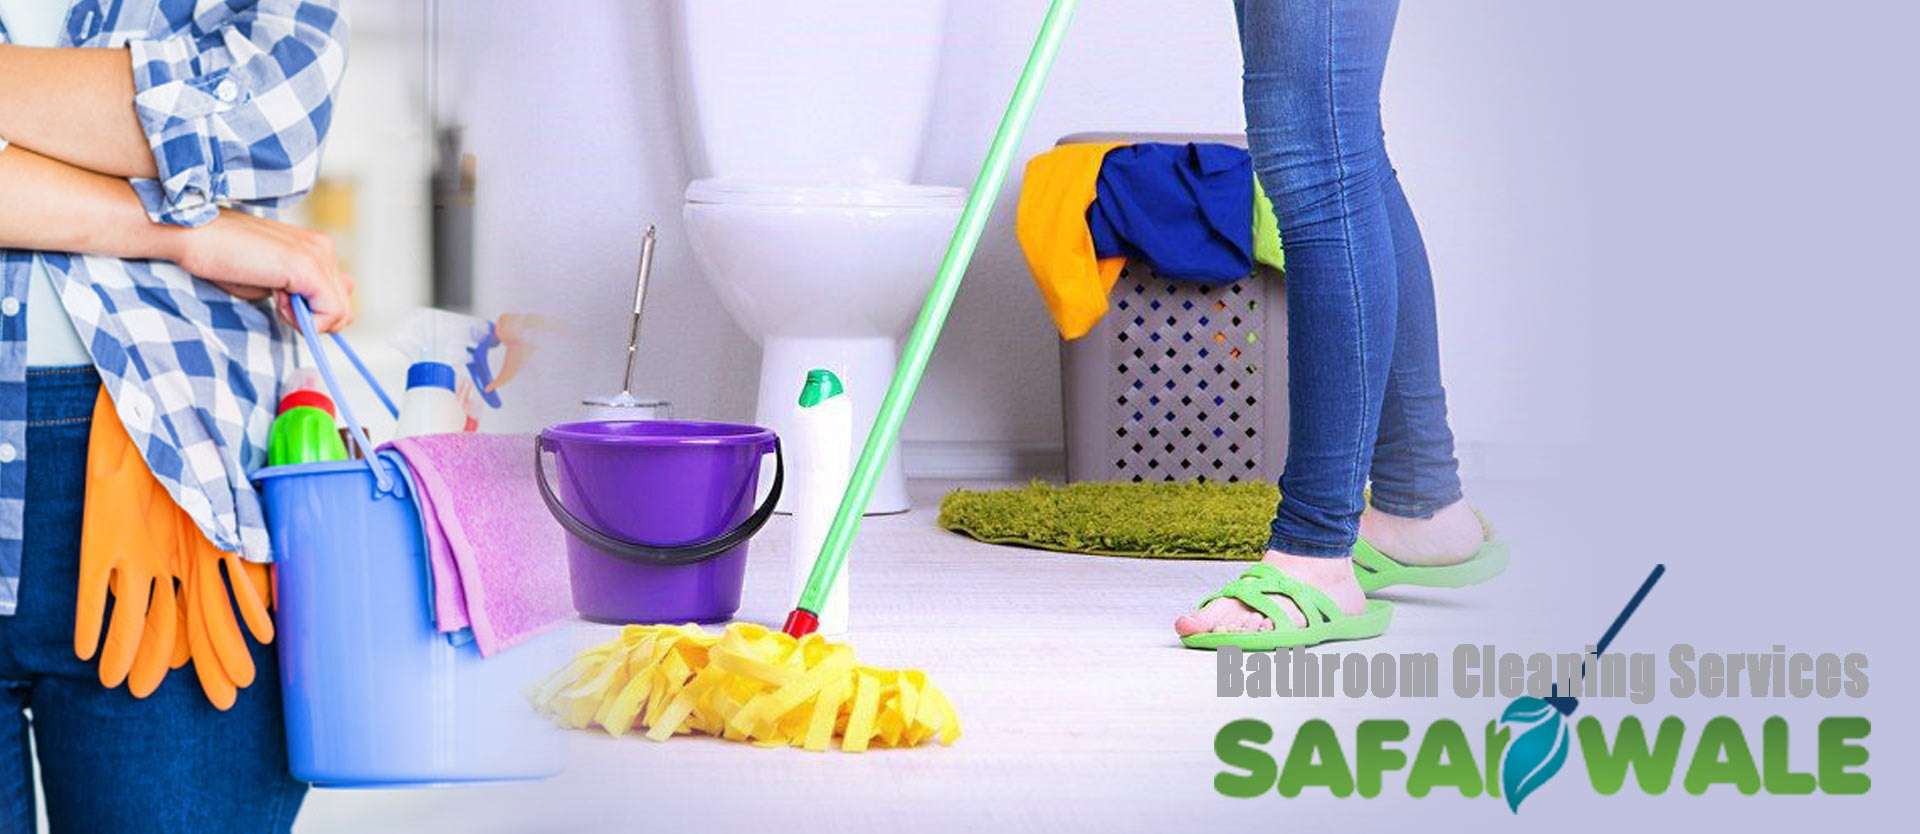 Bathroom Cleaning Services In Troninca City